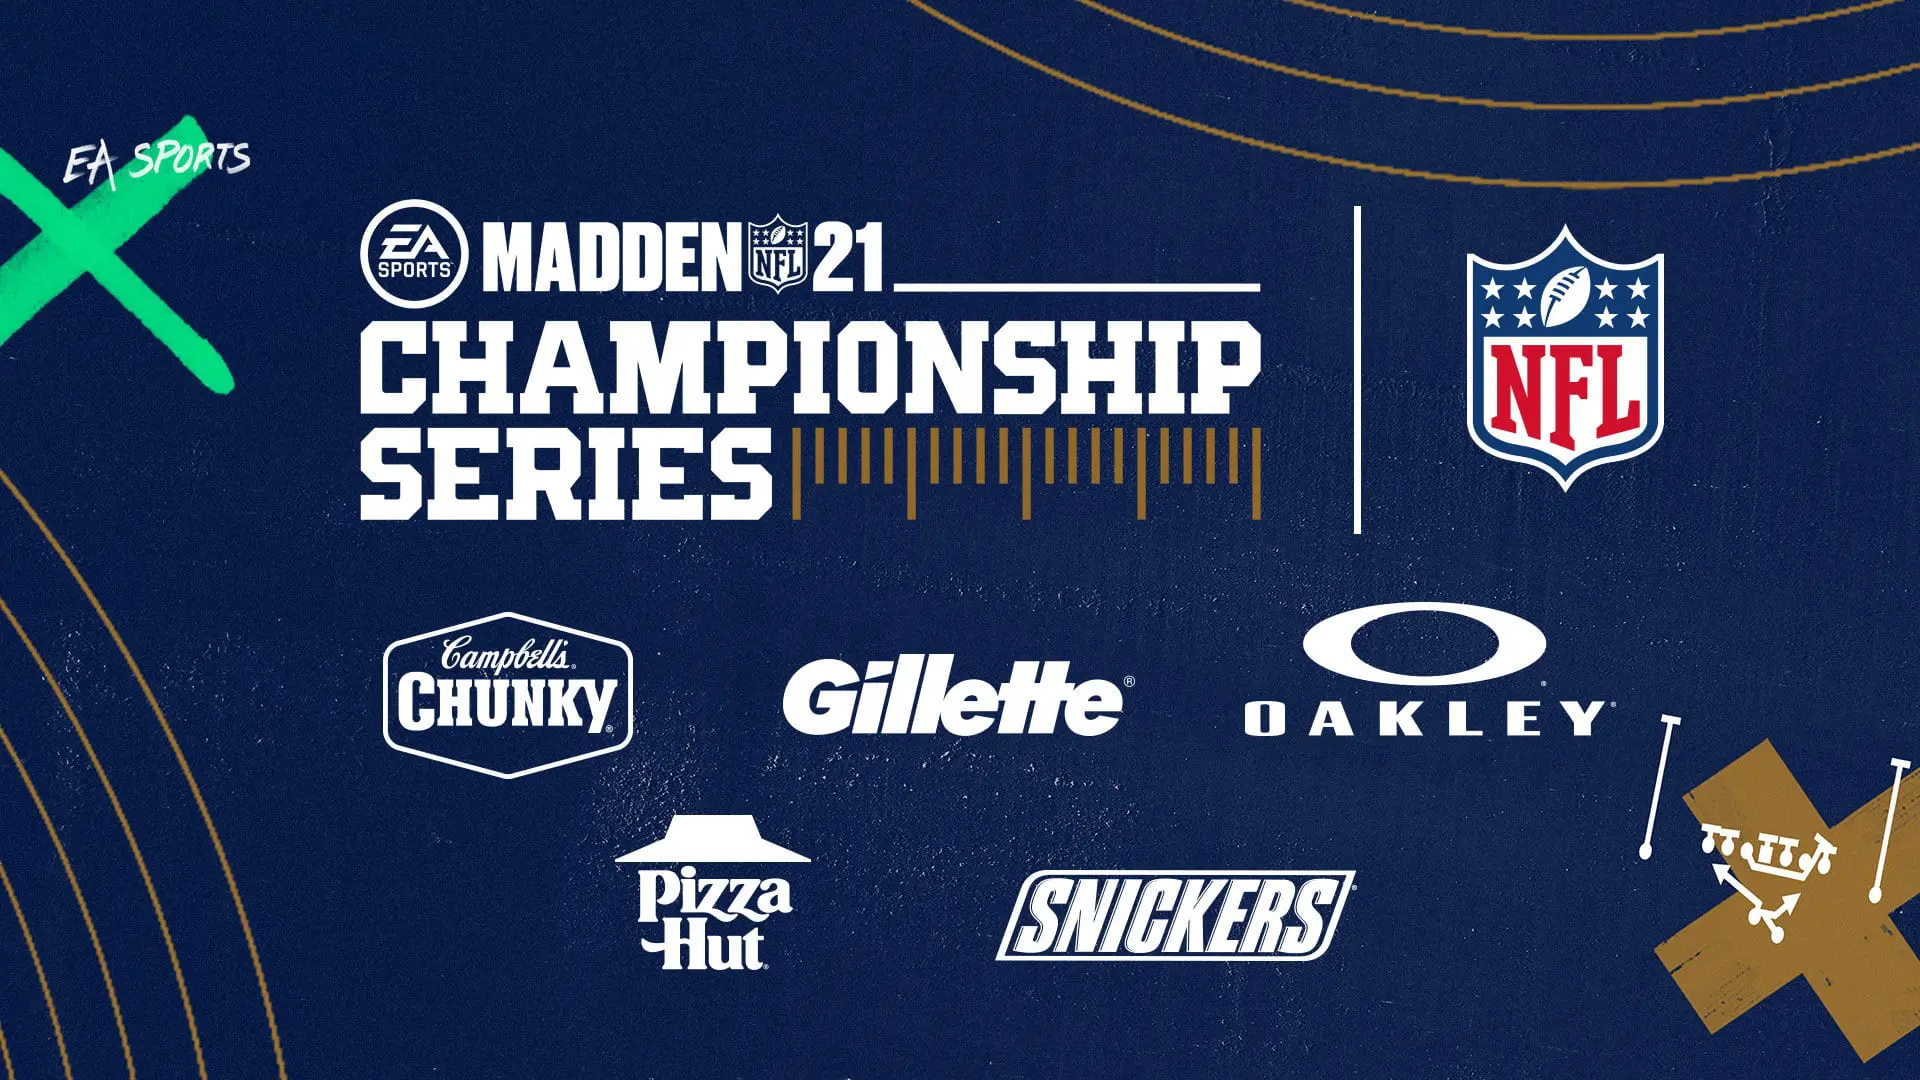 Madden nfl 21 attracts the most sponsors in madden nfl championship series history